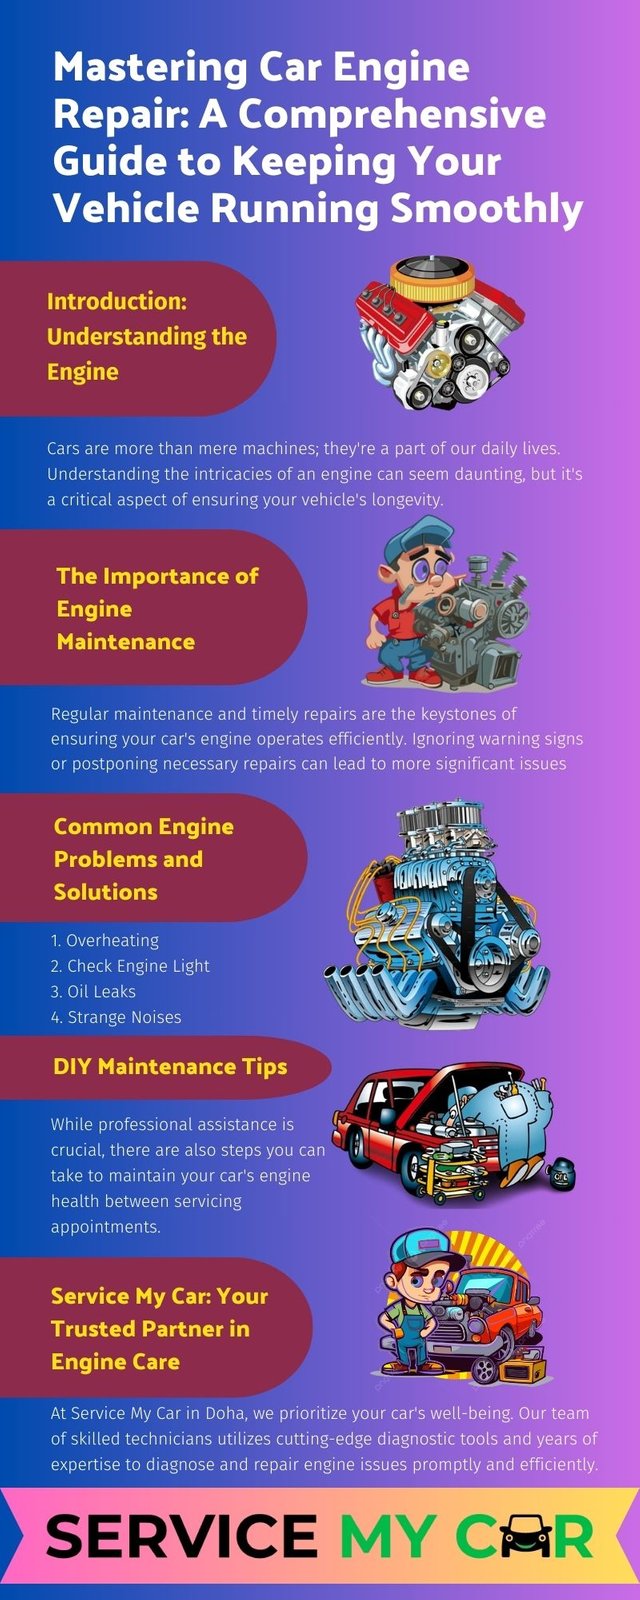 Mastering Car Engine Repair A Comprehensive Guide to Keeping Your Vehicle Running Smoothly